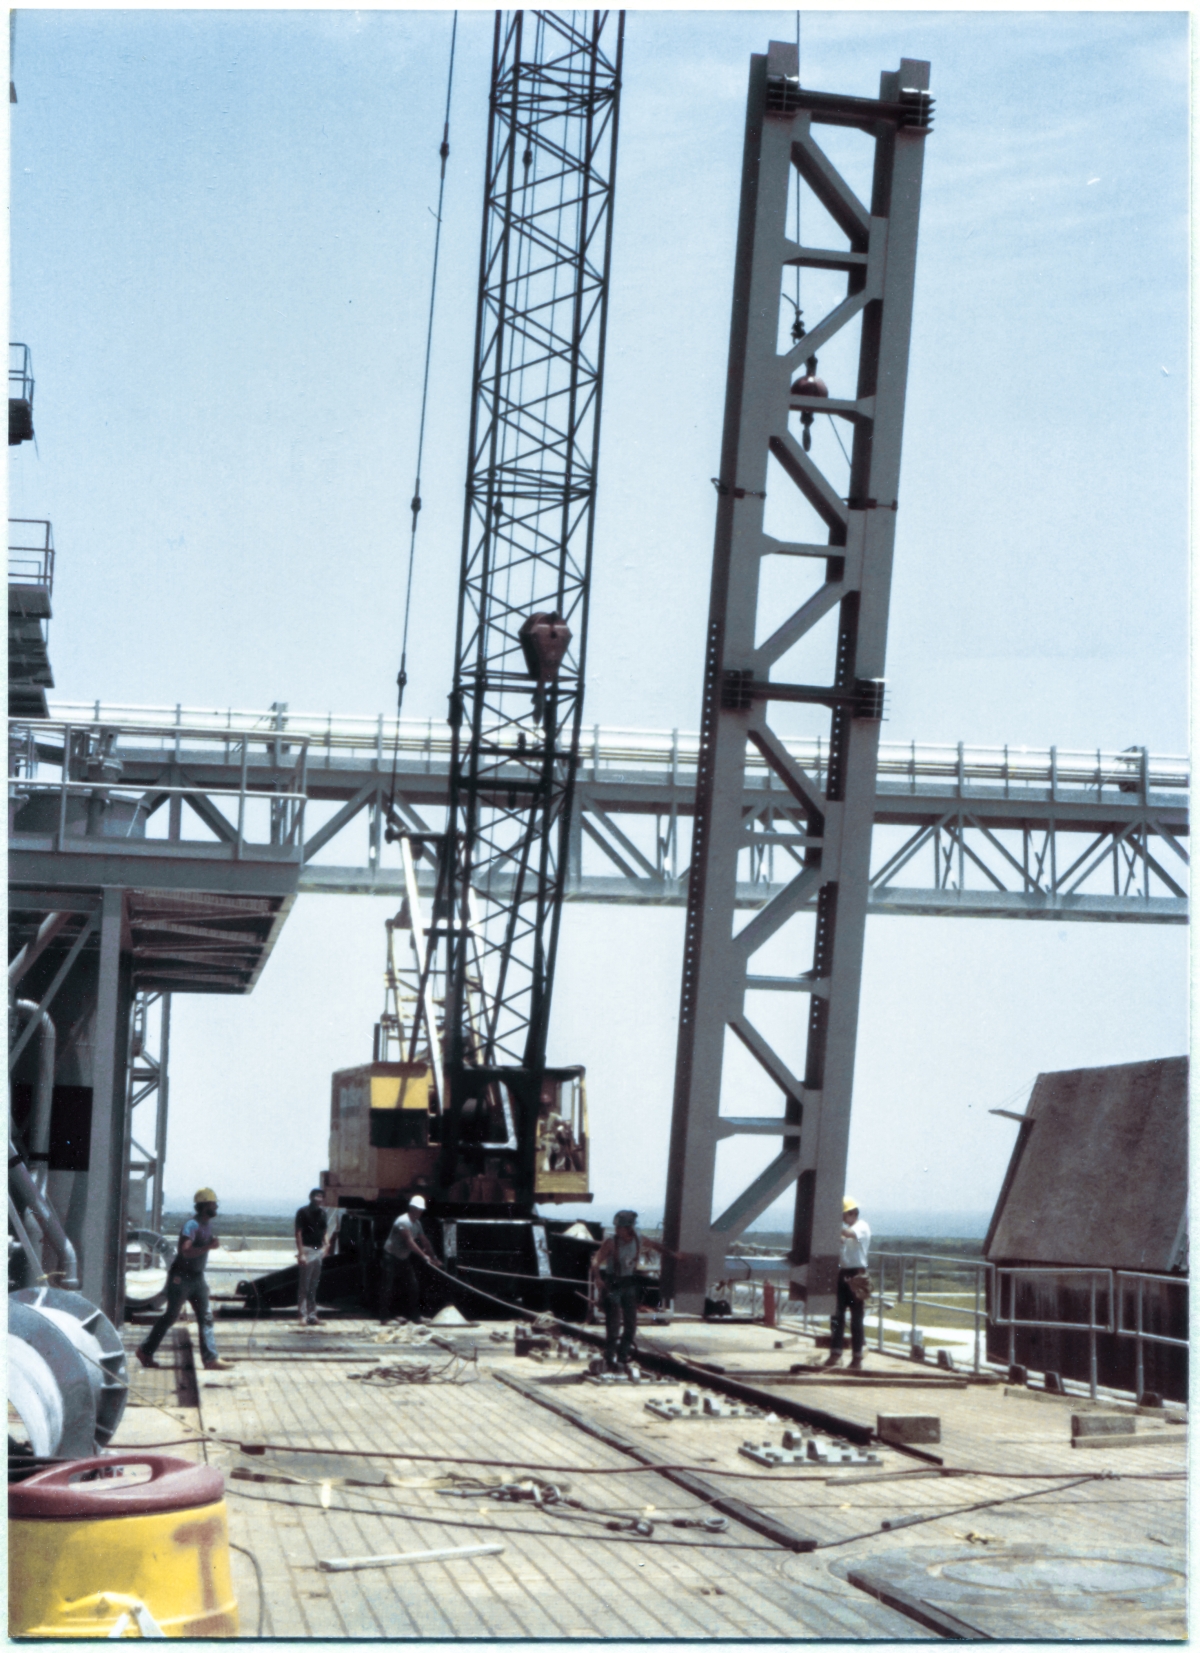 Image 076. The GOX Arm Strongback lift is now fully under way, with the strongback clear of the ground which was supporting it, now hanging in suspension, supported solely by its outré lifting sling which is attached via a set of shackles up above the headache ball and the crane's lifting hook beneath that. In this image, the headache ball can clearly be seen hanging off-center, away from the crane's jib line, its own attach hardware pulled to the side at a significant angle, bearing no load above and beyond its own weight. From this angle, the choker slings wrapped around the twin W24x104's which constitute the main body of the Strongback can be seen resting on pads at each corner of the wide-flanges to keep from chafing, possibly damaging not only the Strongback, but also the wire ropes of the slings. Photo by James MacLaren.